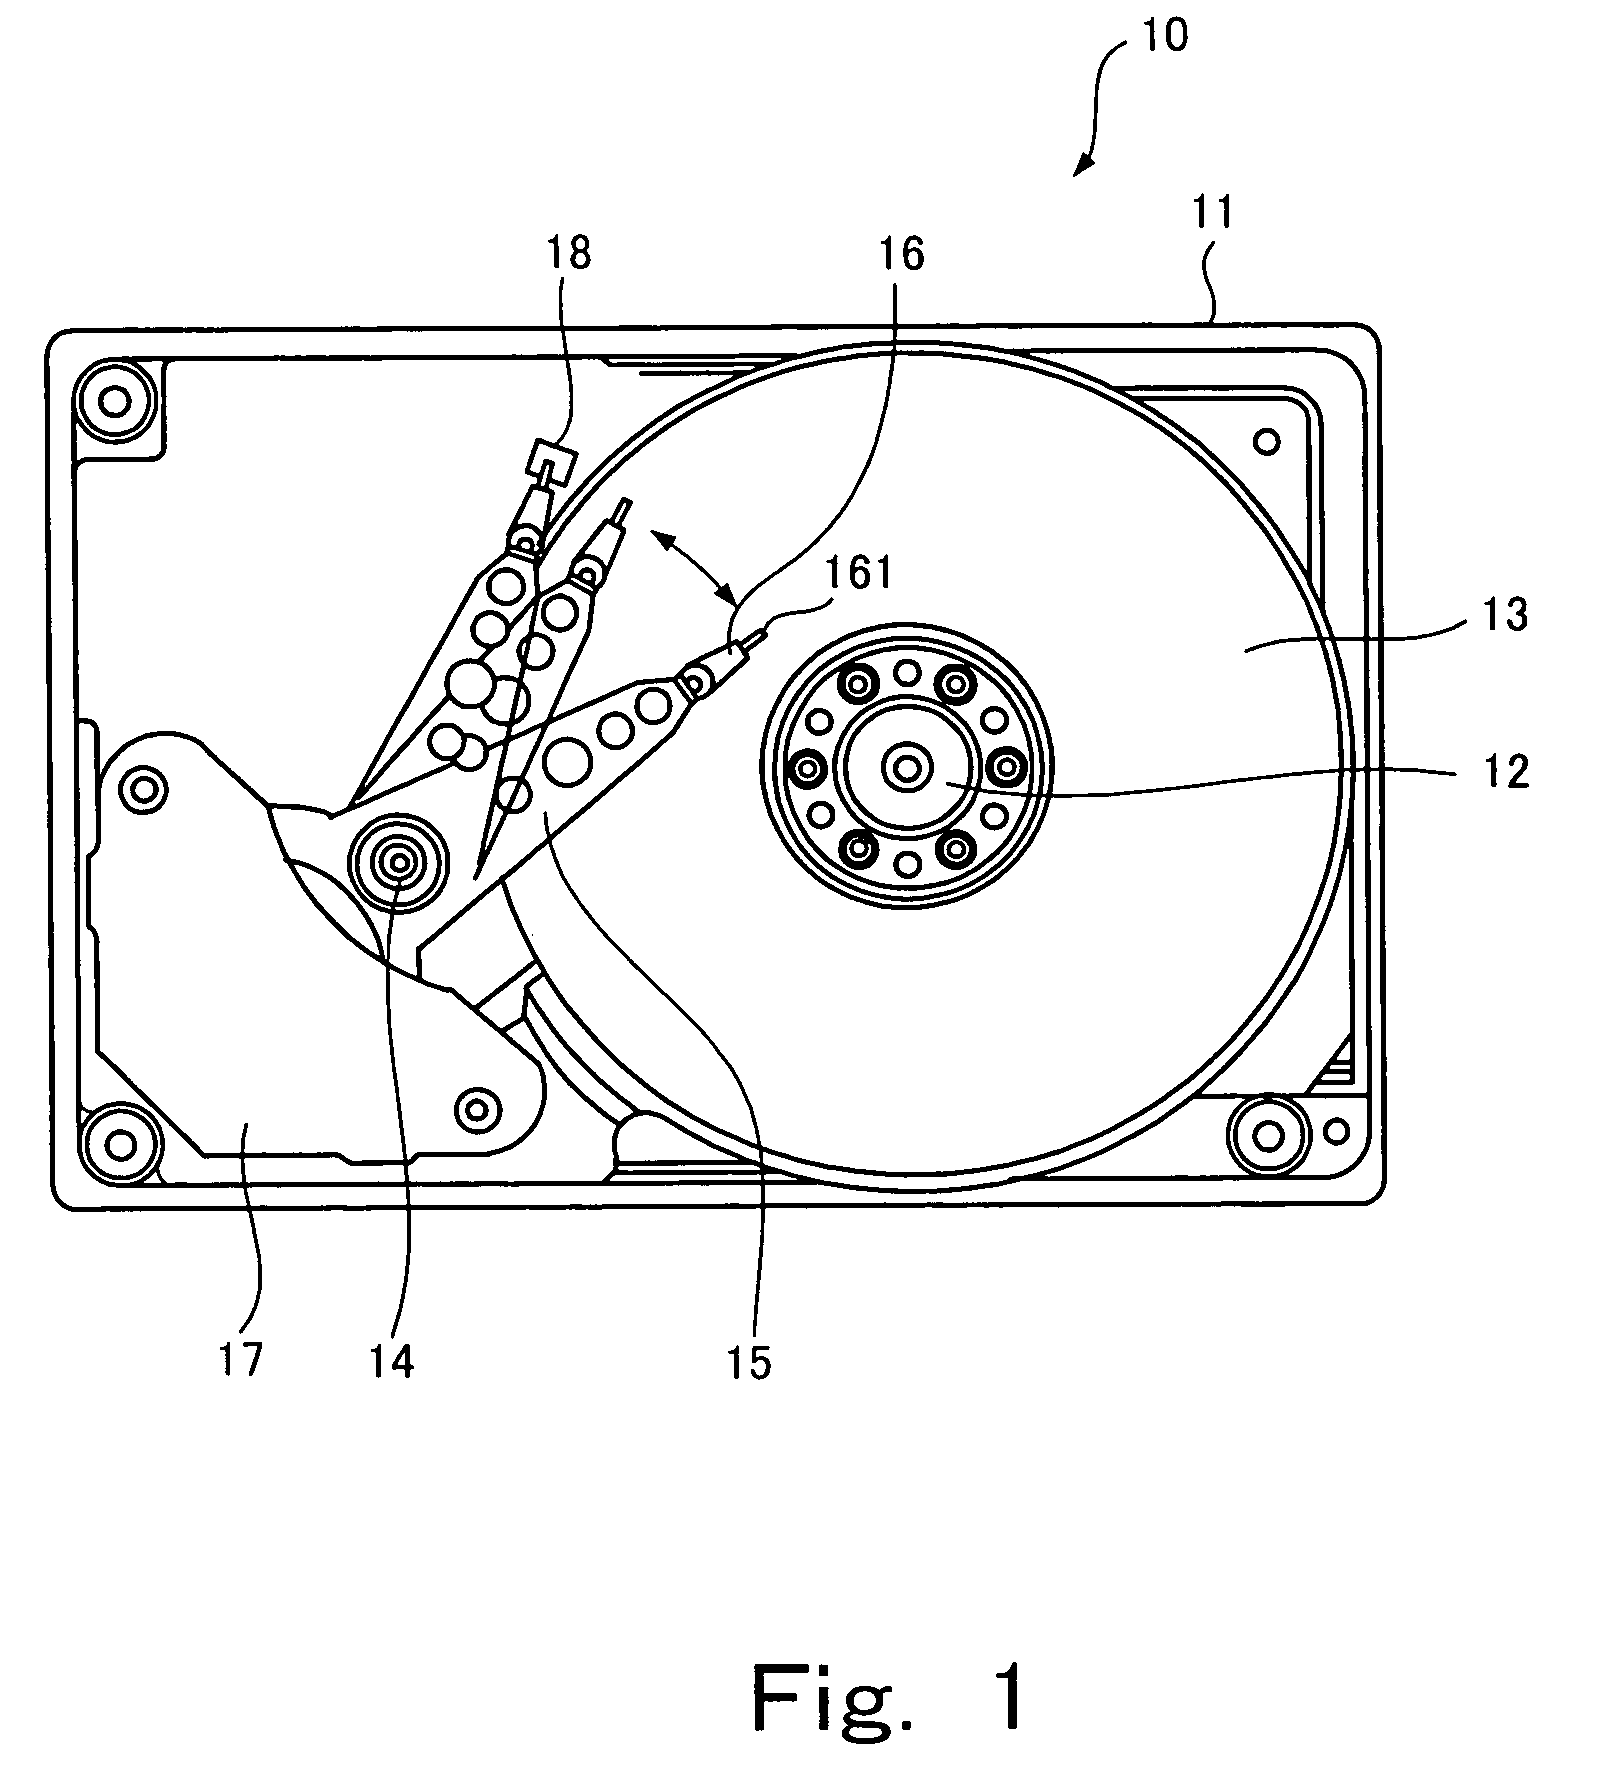 Disk apparatus having suspension provided with head support projections